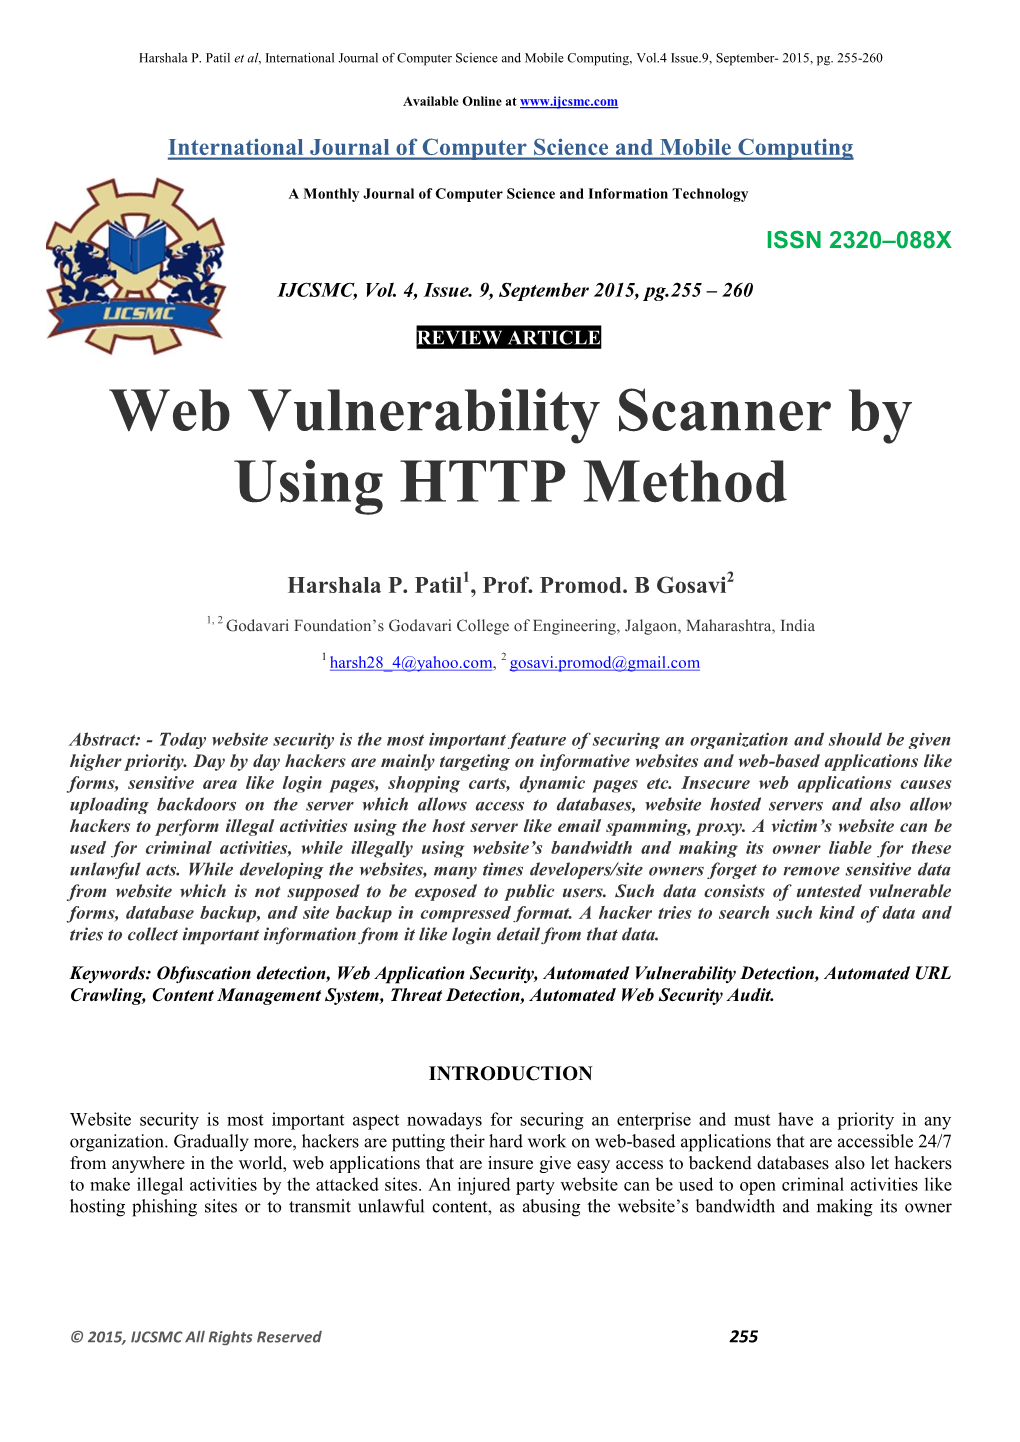 Vulnerability Scanner by Using HTTP Method